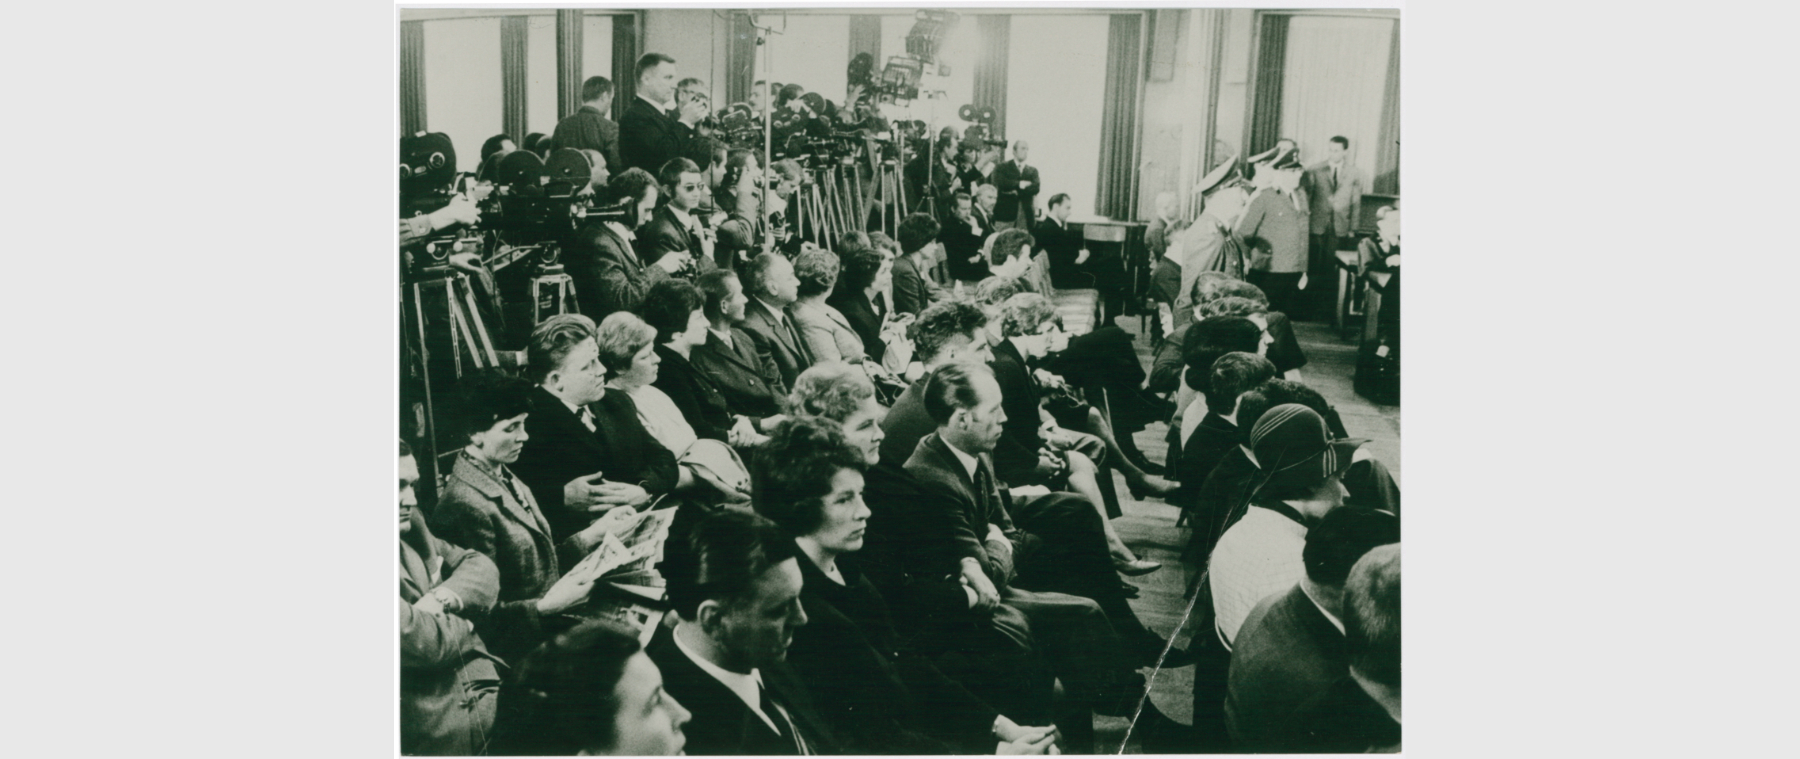 The photo shows attendees following the thalidomide trials in the great criminal court of Aachen. Picture taken around 1968.